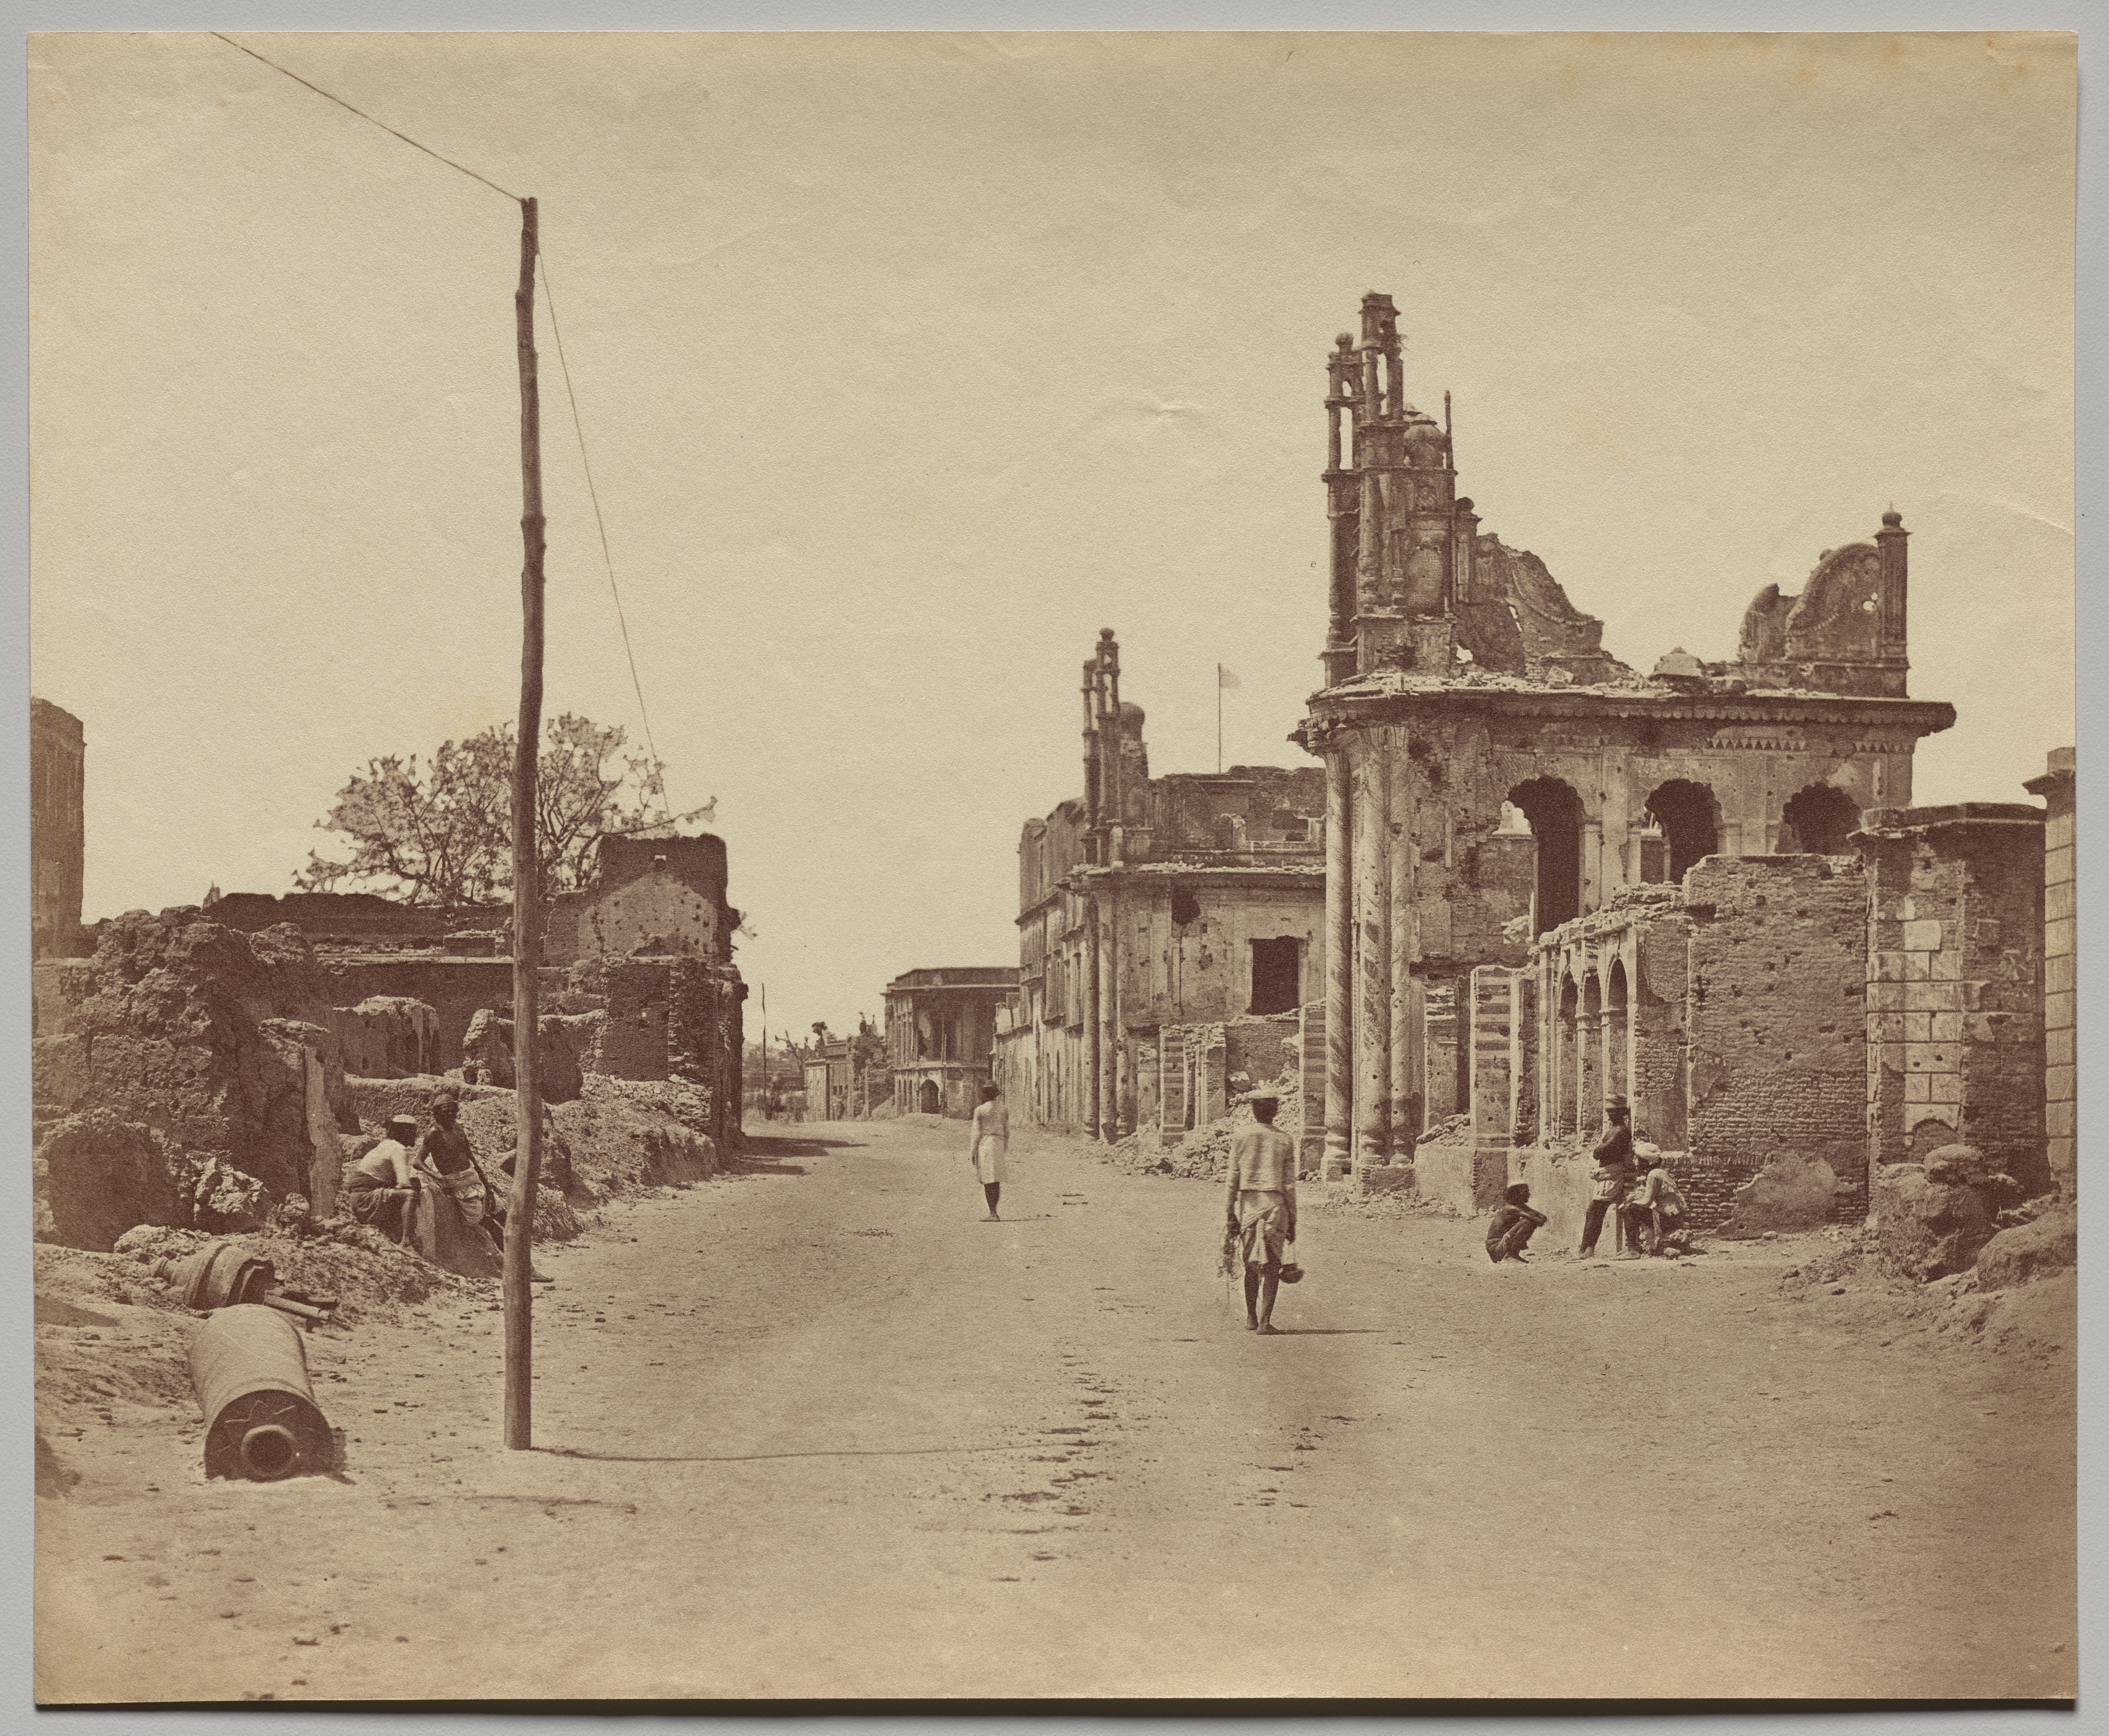 The Cawnpore Road in Lucknow